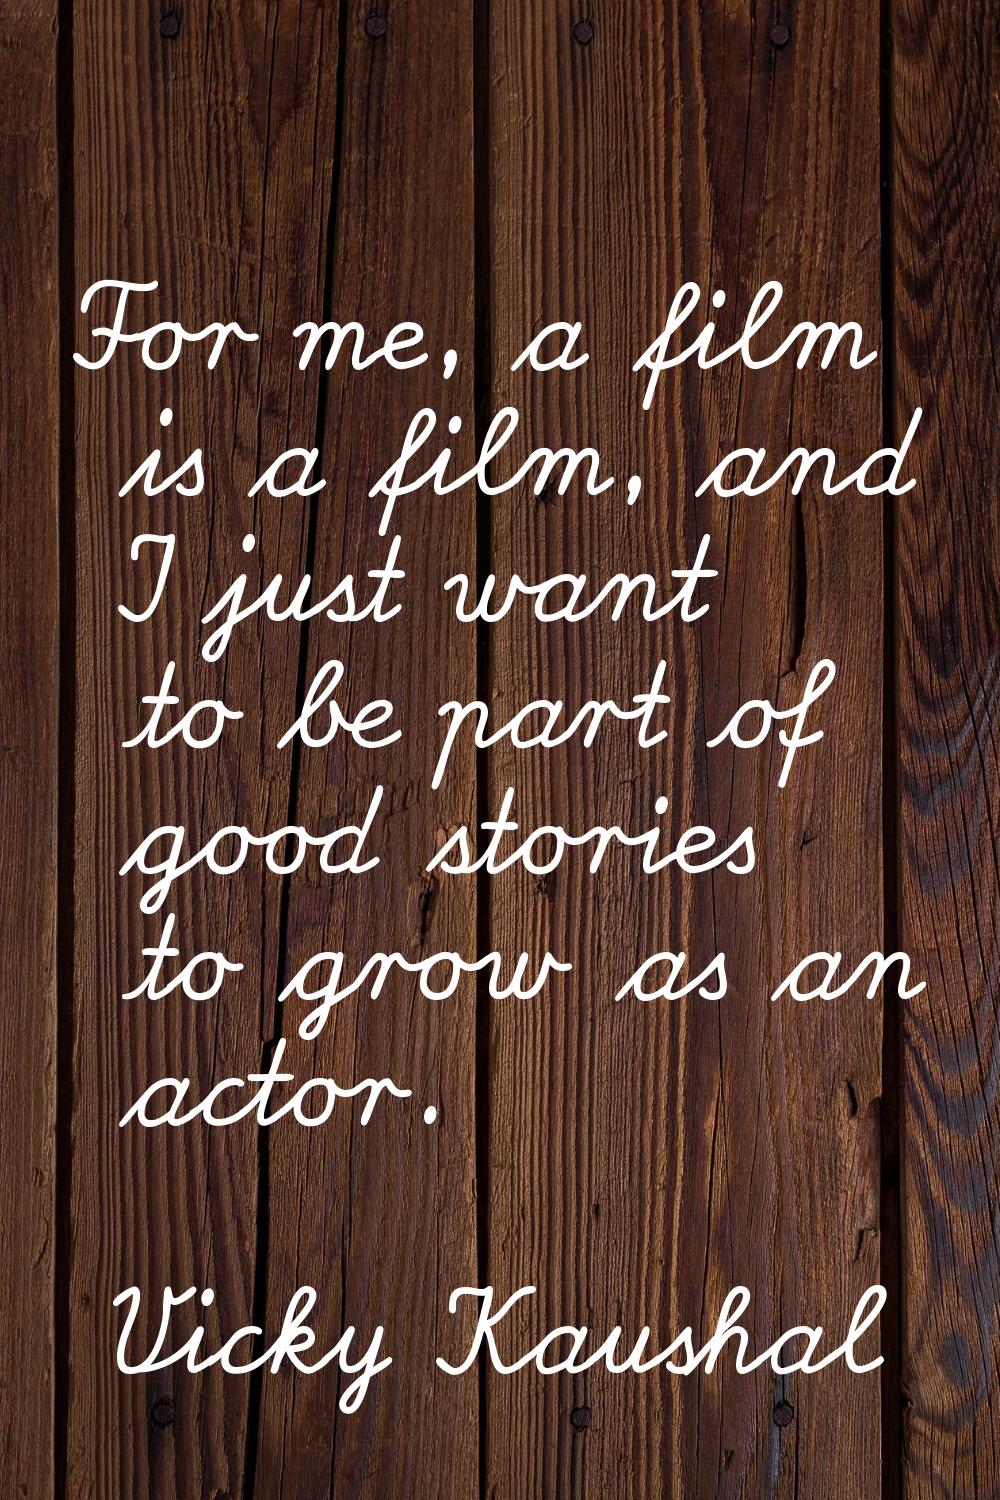 For me, a film is a film, and I just want to be part of good stories to grow as an actor.